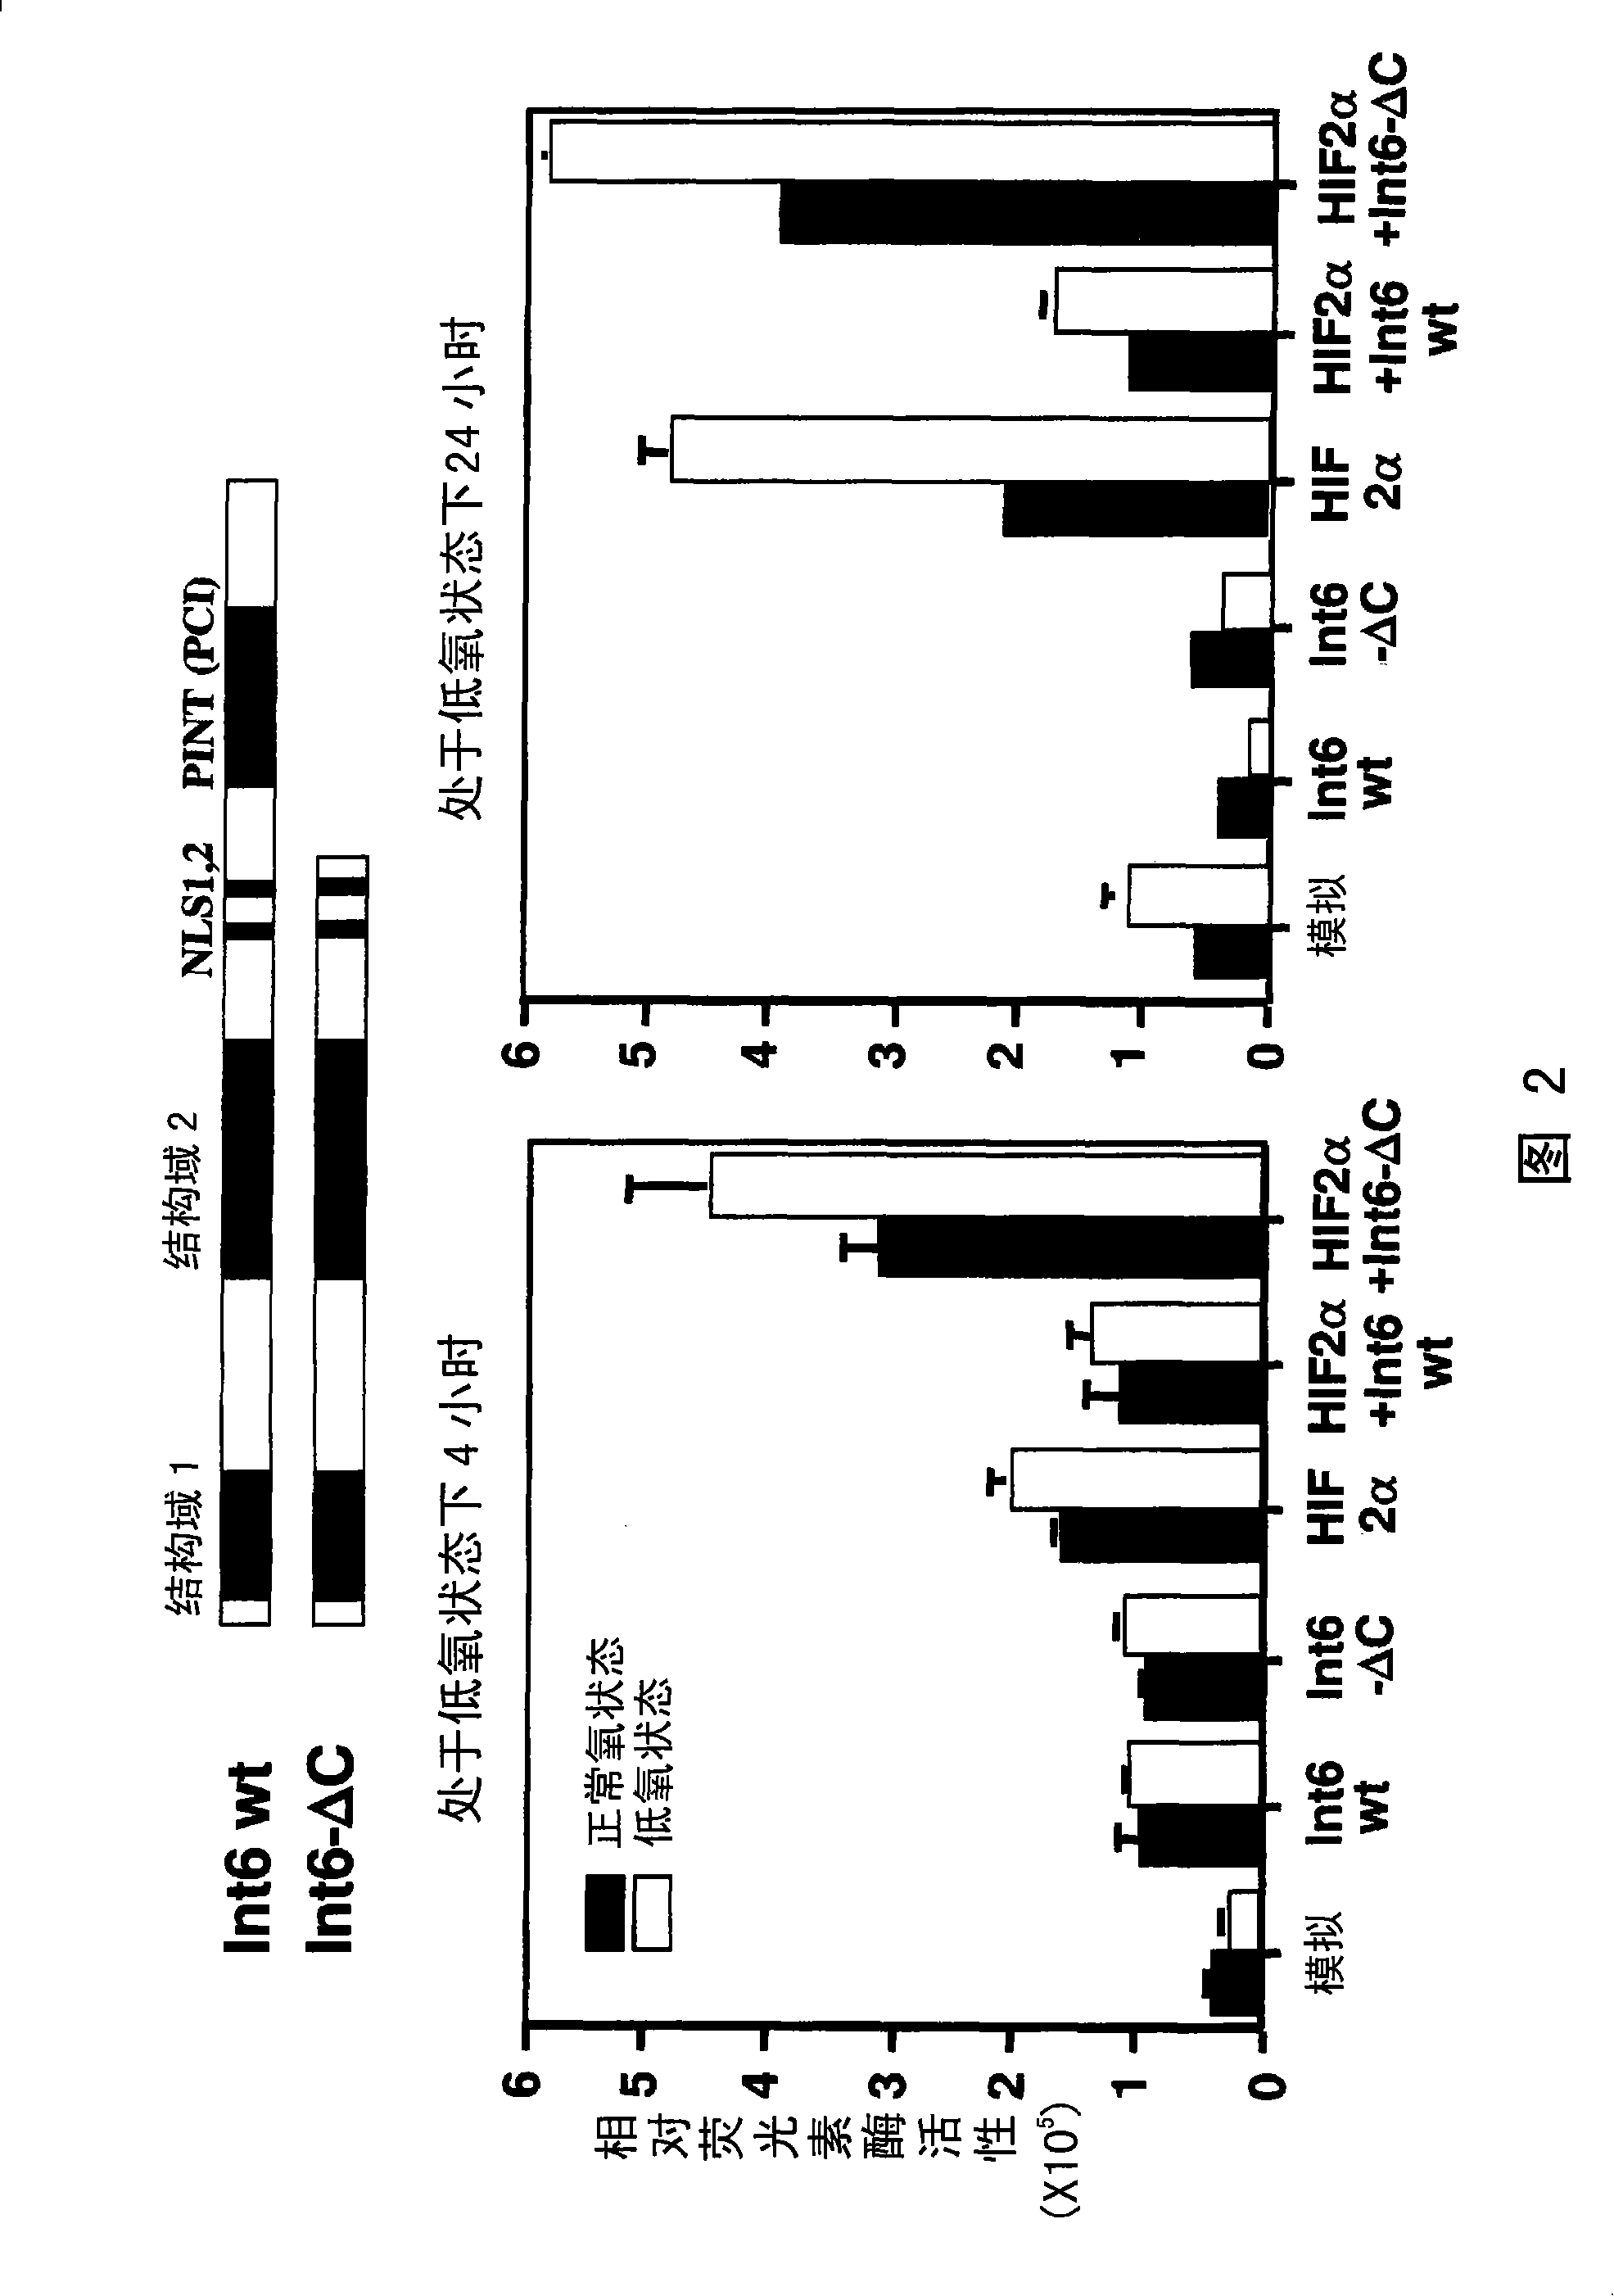 Int6 protein involved in hypoxia stress induction and use thereof